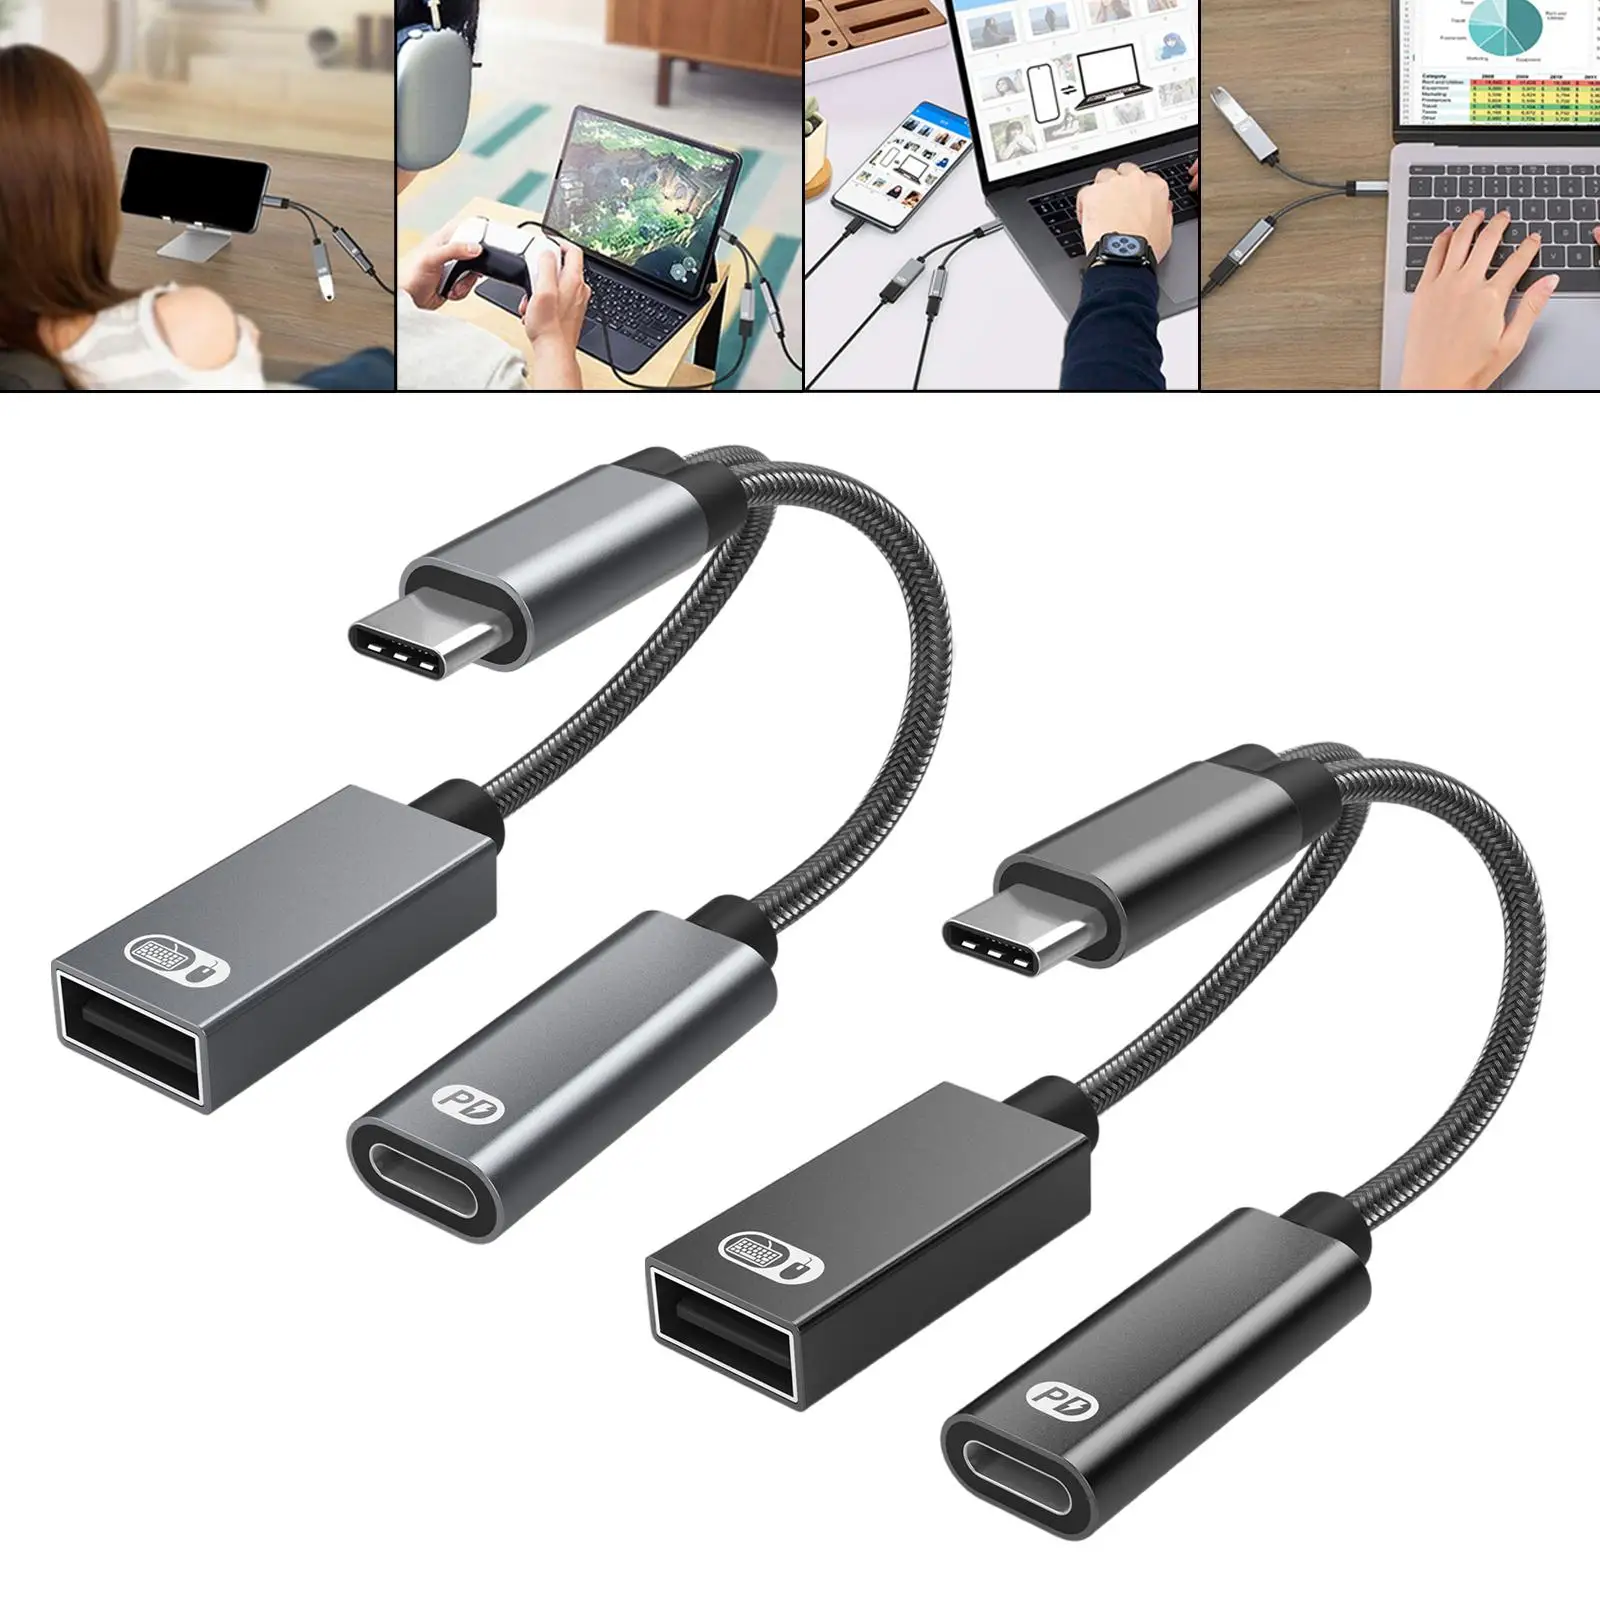 USB C OTG Adapter with Fast Charging PD 60W 2 in 1 Usb-C Splitter for Smartphone